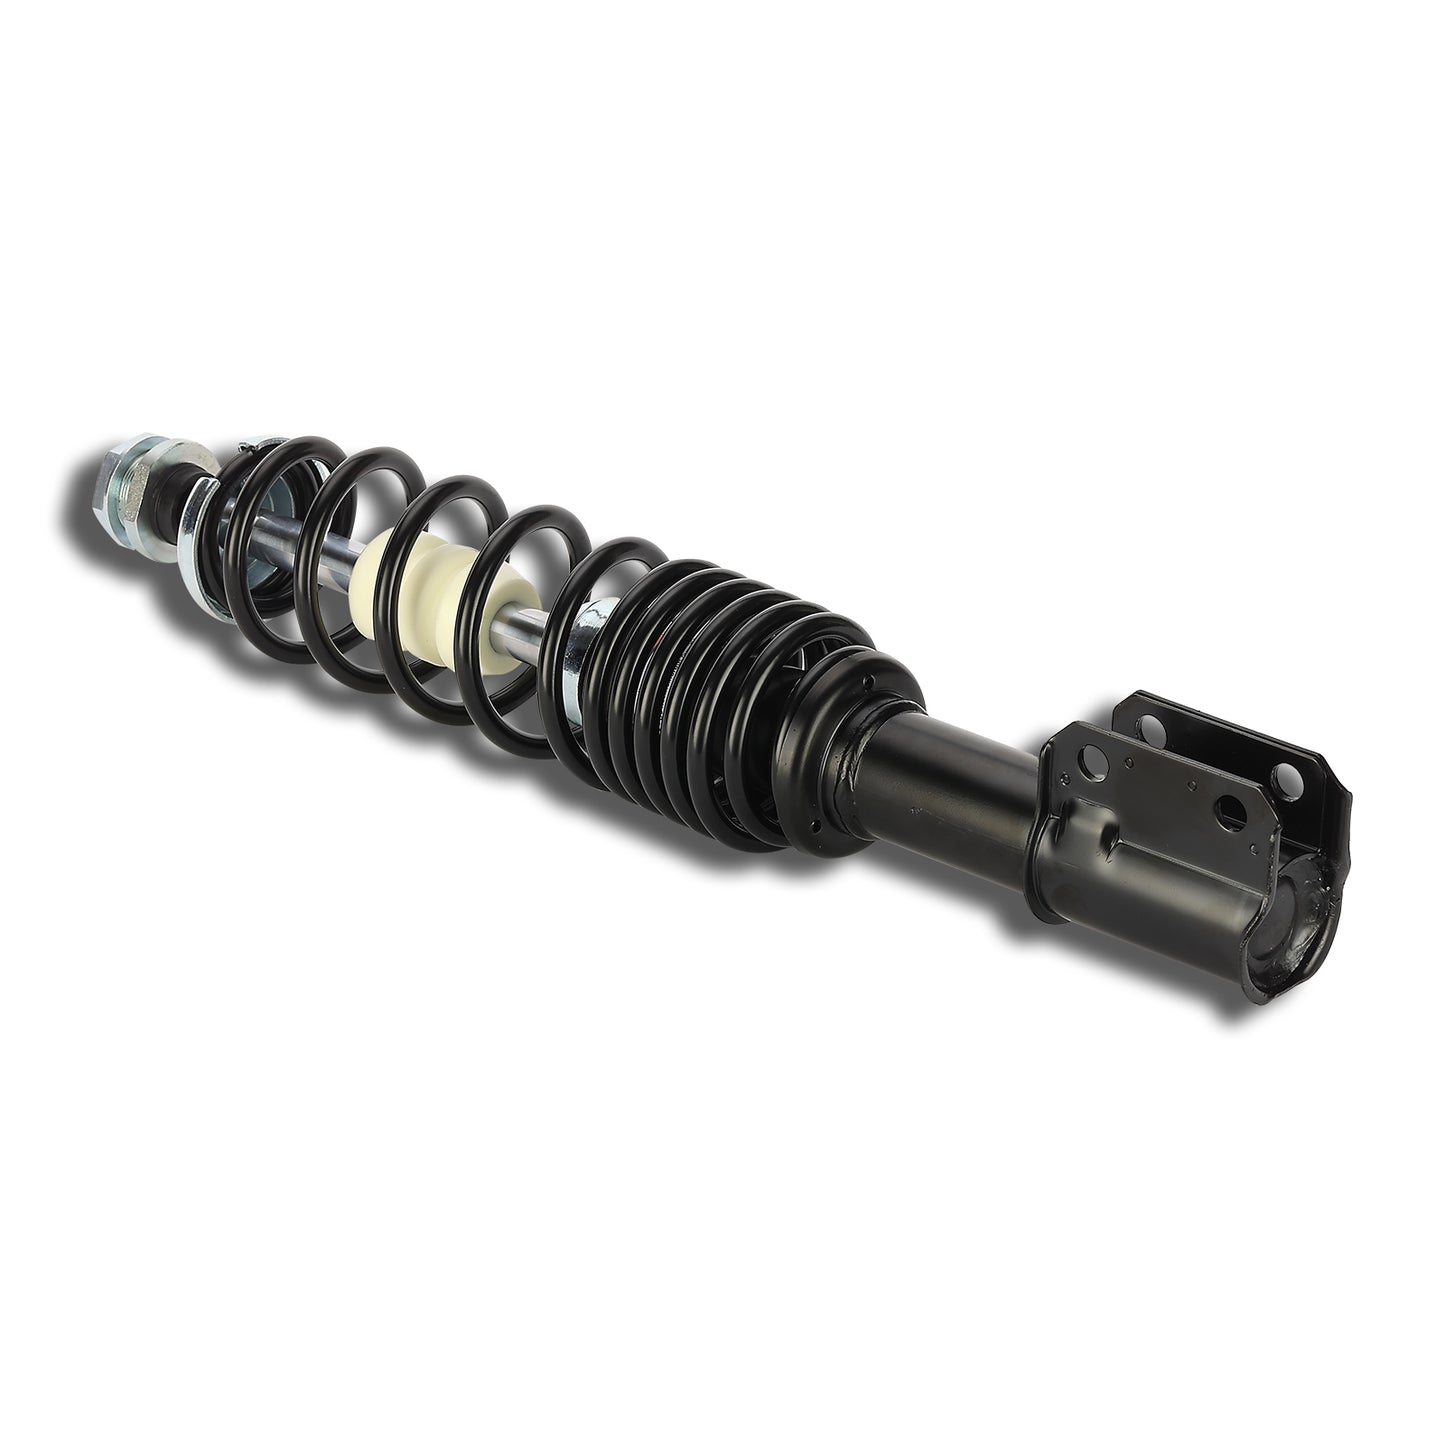 CAM-CA904 ATV Front Left/Right Shock Absorber Replacement for 2007-2009 Can Am Outlander 500 HO, XT 500 MAX, HO, XT Front Shock